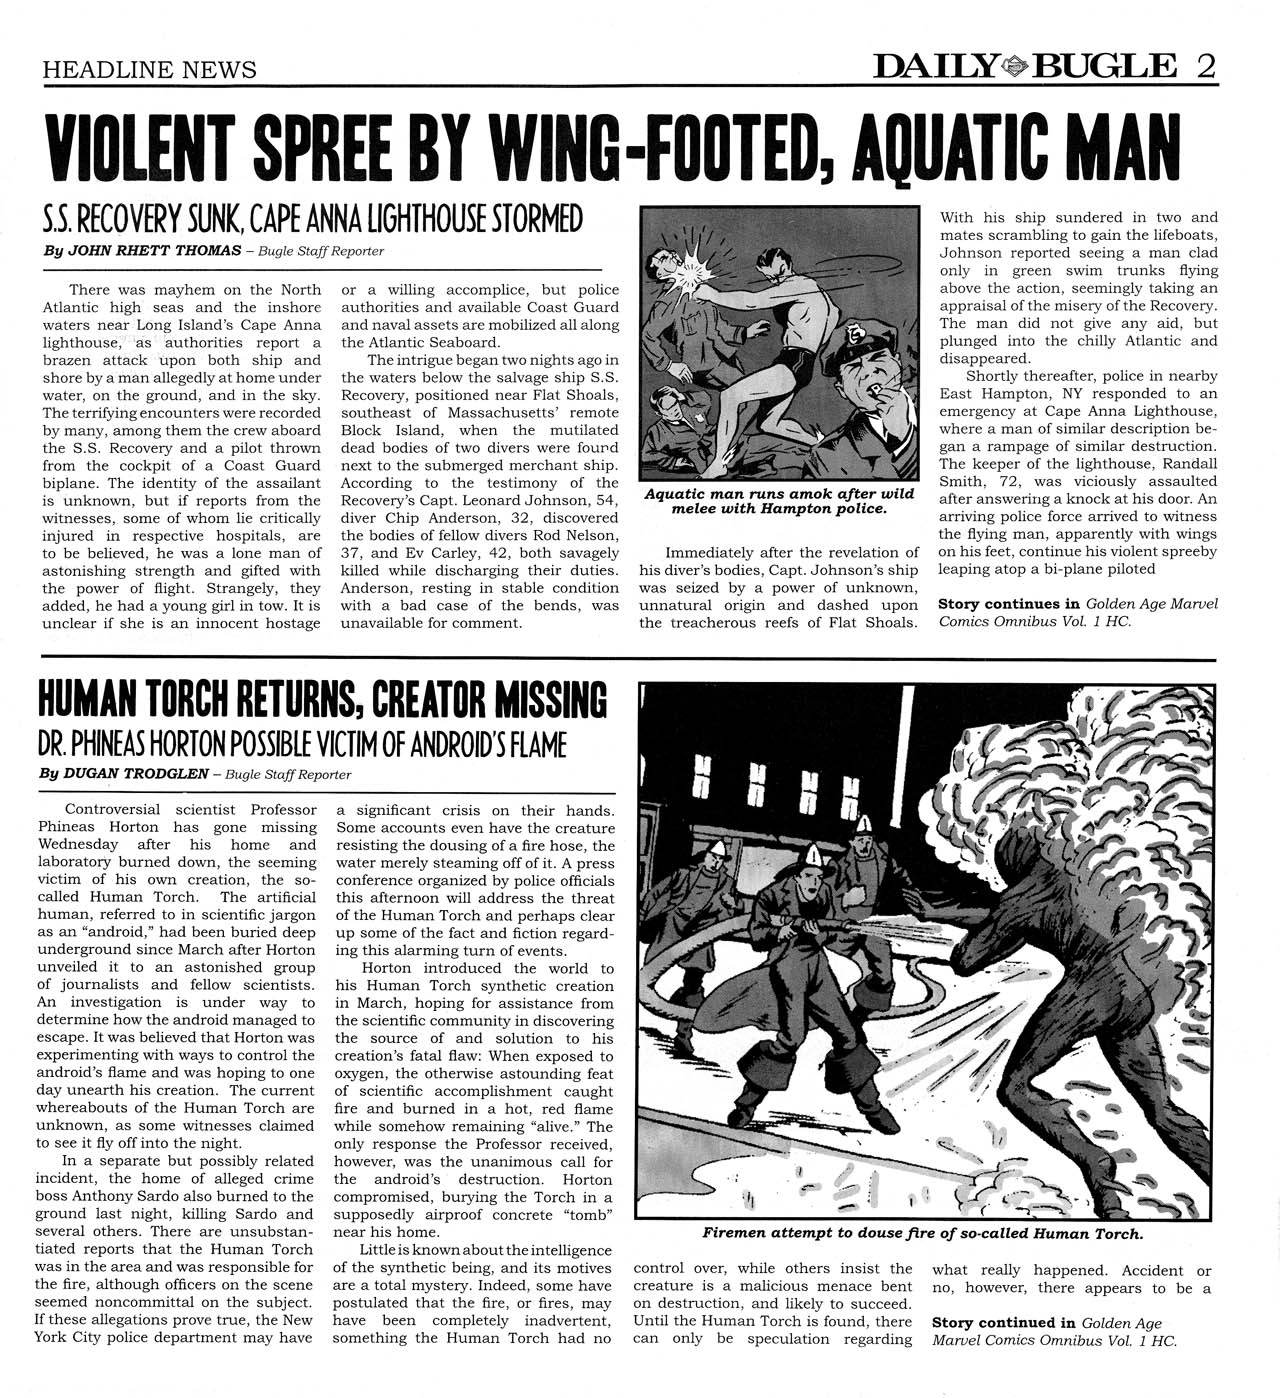 Read online 1939 Daily Bugle comic -  Issue # Full - 2